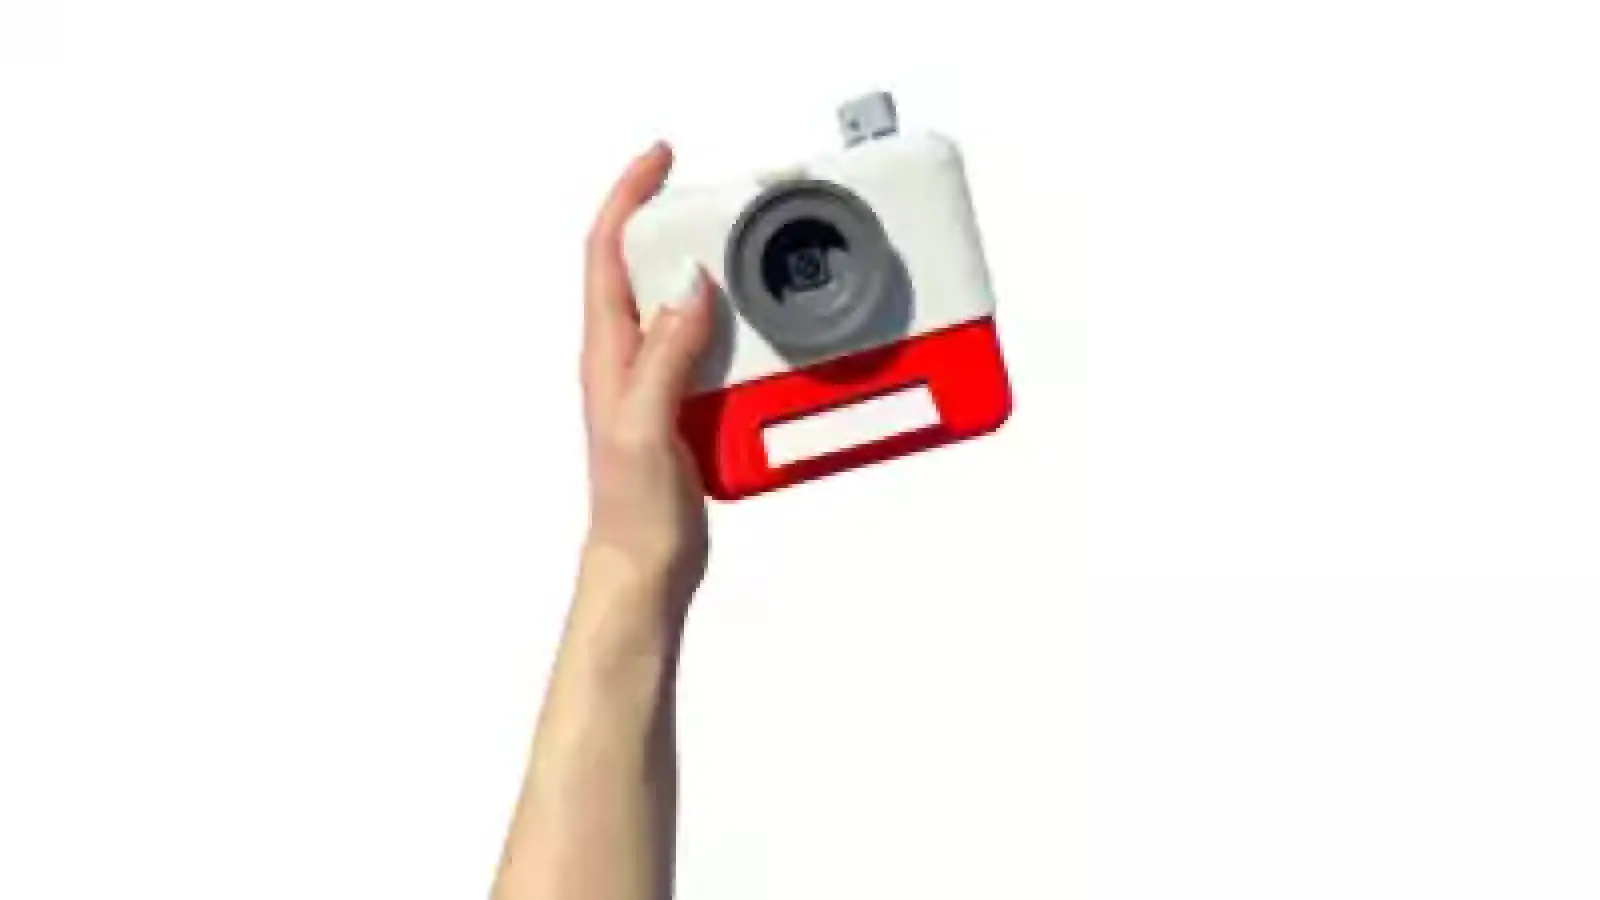 AI-powered camera will create poems from photos, this device is amazing